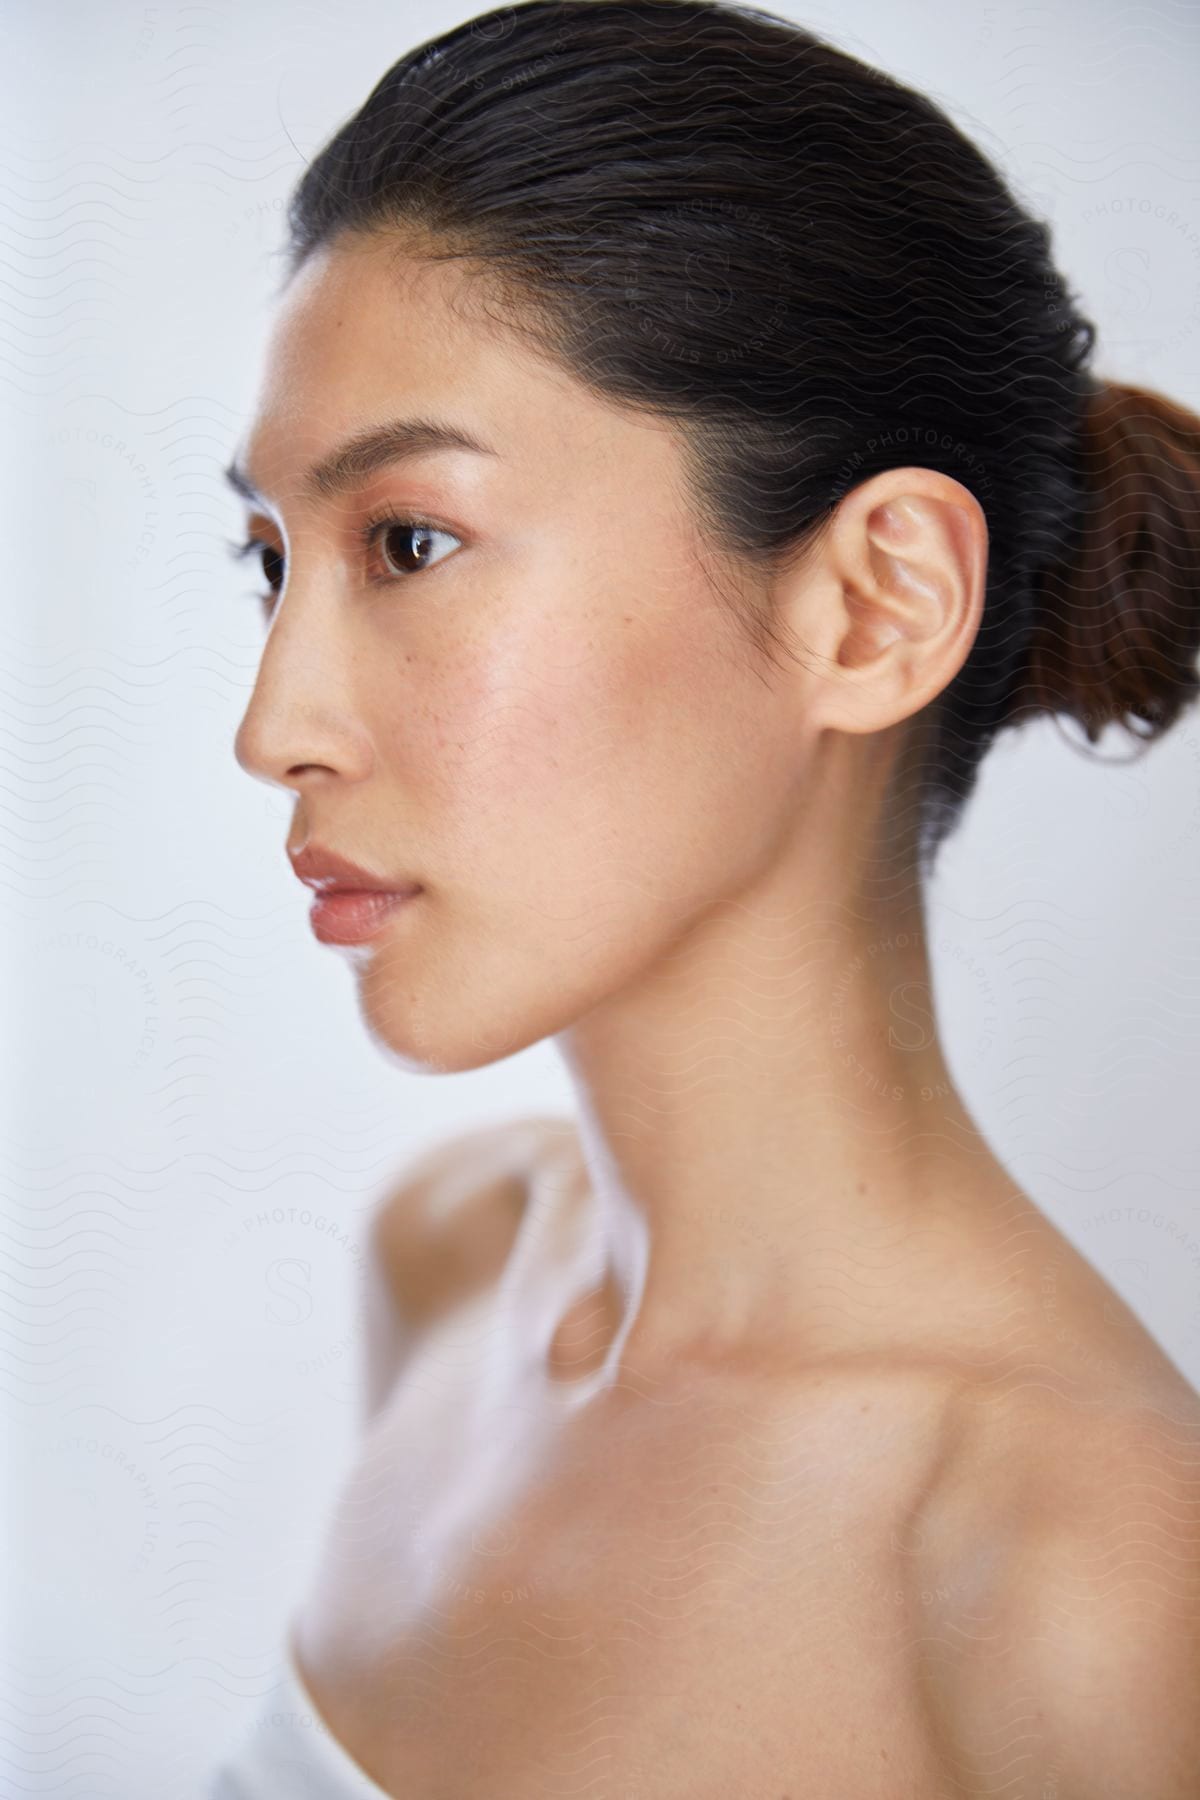 A Japanese woman in a white shoulderless top, her hair tied in a bun, looks off to the side with a serious expression.